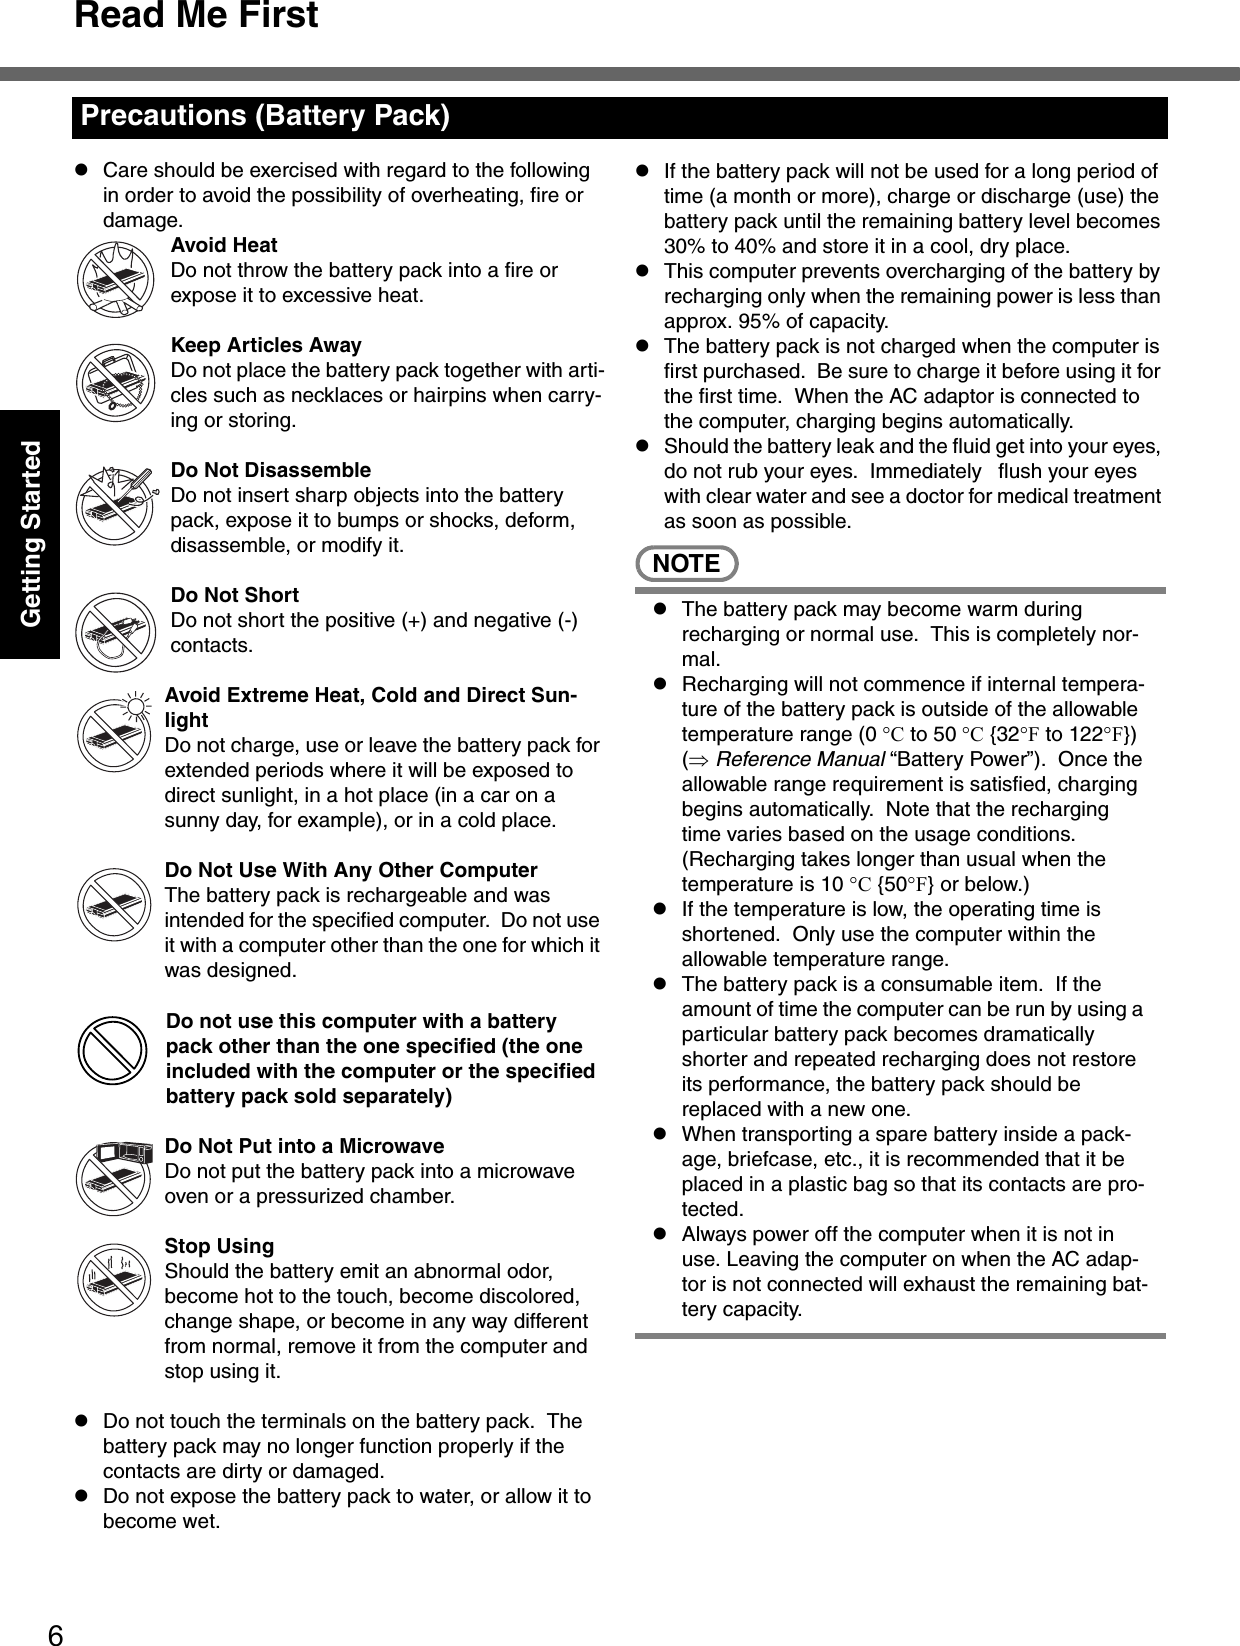 Read Me First6Getting StartedzCare should be exercised with regard to the following in order to avoid the possibility of overheating, fire or damage.Avoid HeatDo not throw the battery pack into a fire or expose it to excessive heat.Keep Articles AwayDo not place the battery pack together with arti-cles such as necklaces or hairpins when carry-ing or storing.Do Not DisassembleDo not insert sharp objects into the battery pack, expose it to bumps or shocks, deform, disassemble, or modify it.Do Not ShortDo not short the positive (+) and negative (-) contacts.Avoid Extreme Heat, Cold and Direct Sun-lightDo not charge, use or leave the battery pack for extended periods where it will be exposed to direct sunlight, in a hot place (in a car on a sunny day, for example), or in a cold place.Do Not Use With Any Other ComputerThe battery pack is rechargeable and was intended for the specified computer.  Do not use it with a computer other than the one for which it was designed.Do not use this computer with a battery pack other than the one specified (the one included with the computer or the specified battery pack sold separately)Do Not Put into a MicrowaveDo not put the battery pack into a microwave oven or a pressurized chamber.Stop UsingShould the battery emit an abnormal odor, become hot to the touch, become discolored, change shape, or become in any way different from normal, remove it from the computer and stop using it.zDo not touch the terminals on the battery pack.  The battery pack may no longer function properly if the contacts are dirty or damaged.zDo not expose the battery pack to water, or allow it to become wet.zIf the battery pack will not be used for a long period of time (a month or more), charge or discharge (use) the battery pack until the remaining battery level becomes 30% to 40% and store it in a cool, dry place.zThis computer prevents overcharging of the battery by recharging only when the remaining power is less than approx. 95% of capacity.zThe battery pack is not charged when the computer is first purchased.  Be sure to charge it before using it for the first time.  When the AC adaptor is connected to the computer, charging begins automatically.zShould the battery leak and the fluid get into your eyes, do not rub your eyes.  Immediately  flush your eyes with clear water and see a doctor for medical treatment as soon as possible.NOTEzThe battery pack may become warm during recharging or normal use.  This is completely nor-mal.zRecharging will not commence if internal tempera-ture of the battery pack is outside of the allowable temperature range (0 °C to 50 °C {32°F to 122°F}) (⇒ Reference Manual “Battery Power”).  Once the allowable range requirement is satisfied, charging begins automatically.  Note that the recharging time varies based on the usage conditions. (Recharging takes longer than usual when the temperature is 10 °C {50°F} or below.)zIf the temperature is low, the operating time is shortened.  Only use the computer within the allowable temperature range.zThe battery pack is a consumable item.  If the amount of time the computer can be run by using a particular battery pack becomes dramatically shorter and repeated recharging does not restore its performance, the battery pack should be replaced with a new one.zWhen transporting a spare battery inside a pack-age, briefcase, etc., it is recommended that it be placed in a plastic bag so that its contacts are pro-tected.zAlways power off the computer when it is not in use. Leaving the computer on when the AC adap-tor is not connected will exhaust the remaining bat-tery capacity.Precautions (Battery Pack)